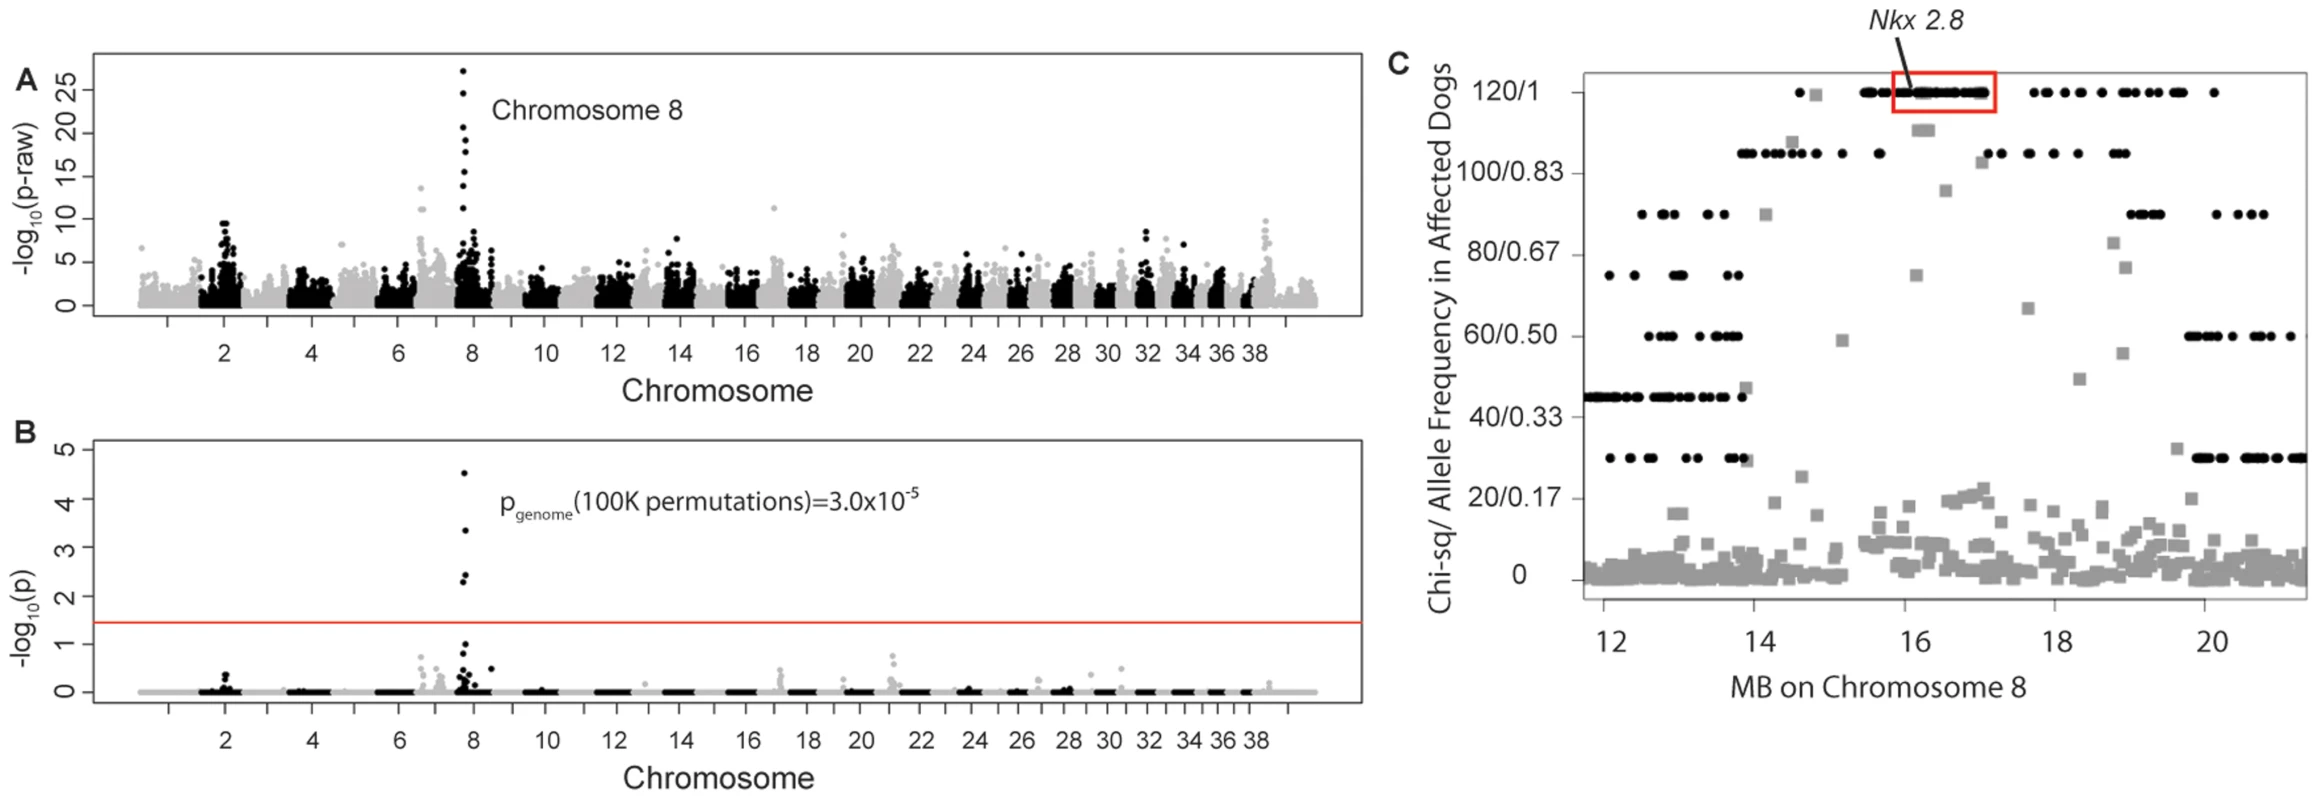 Manhattan plots of GWAS results for NTDs in Weimaraners (4 cases, 96 controls; λ = 1.03).